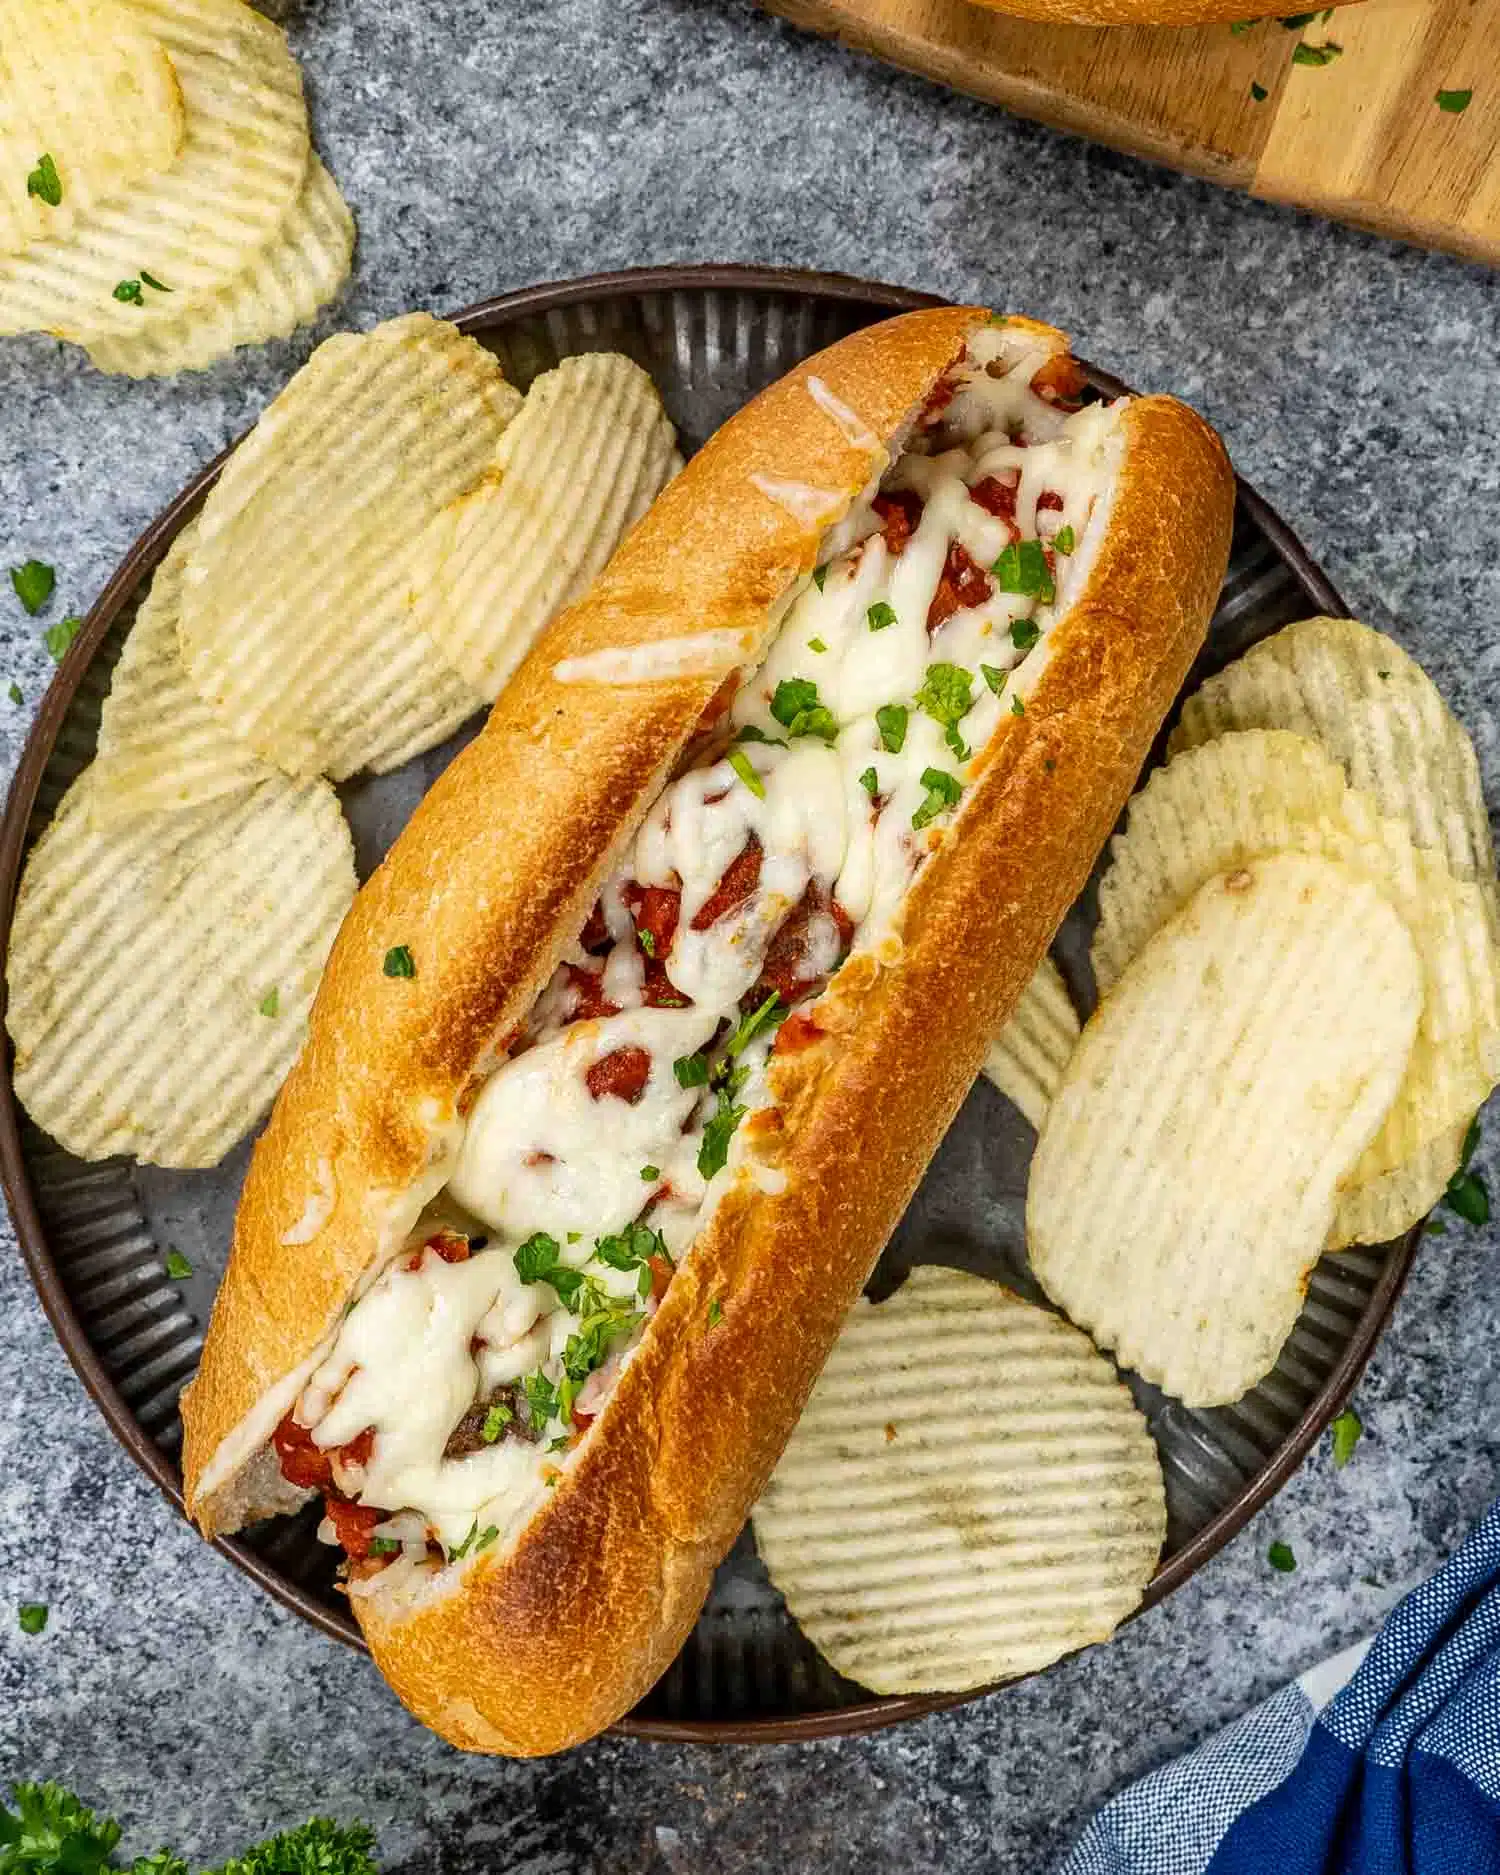 a meatball sub garnished with parsley with potato chips on a plate.